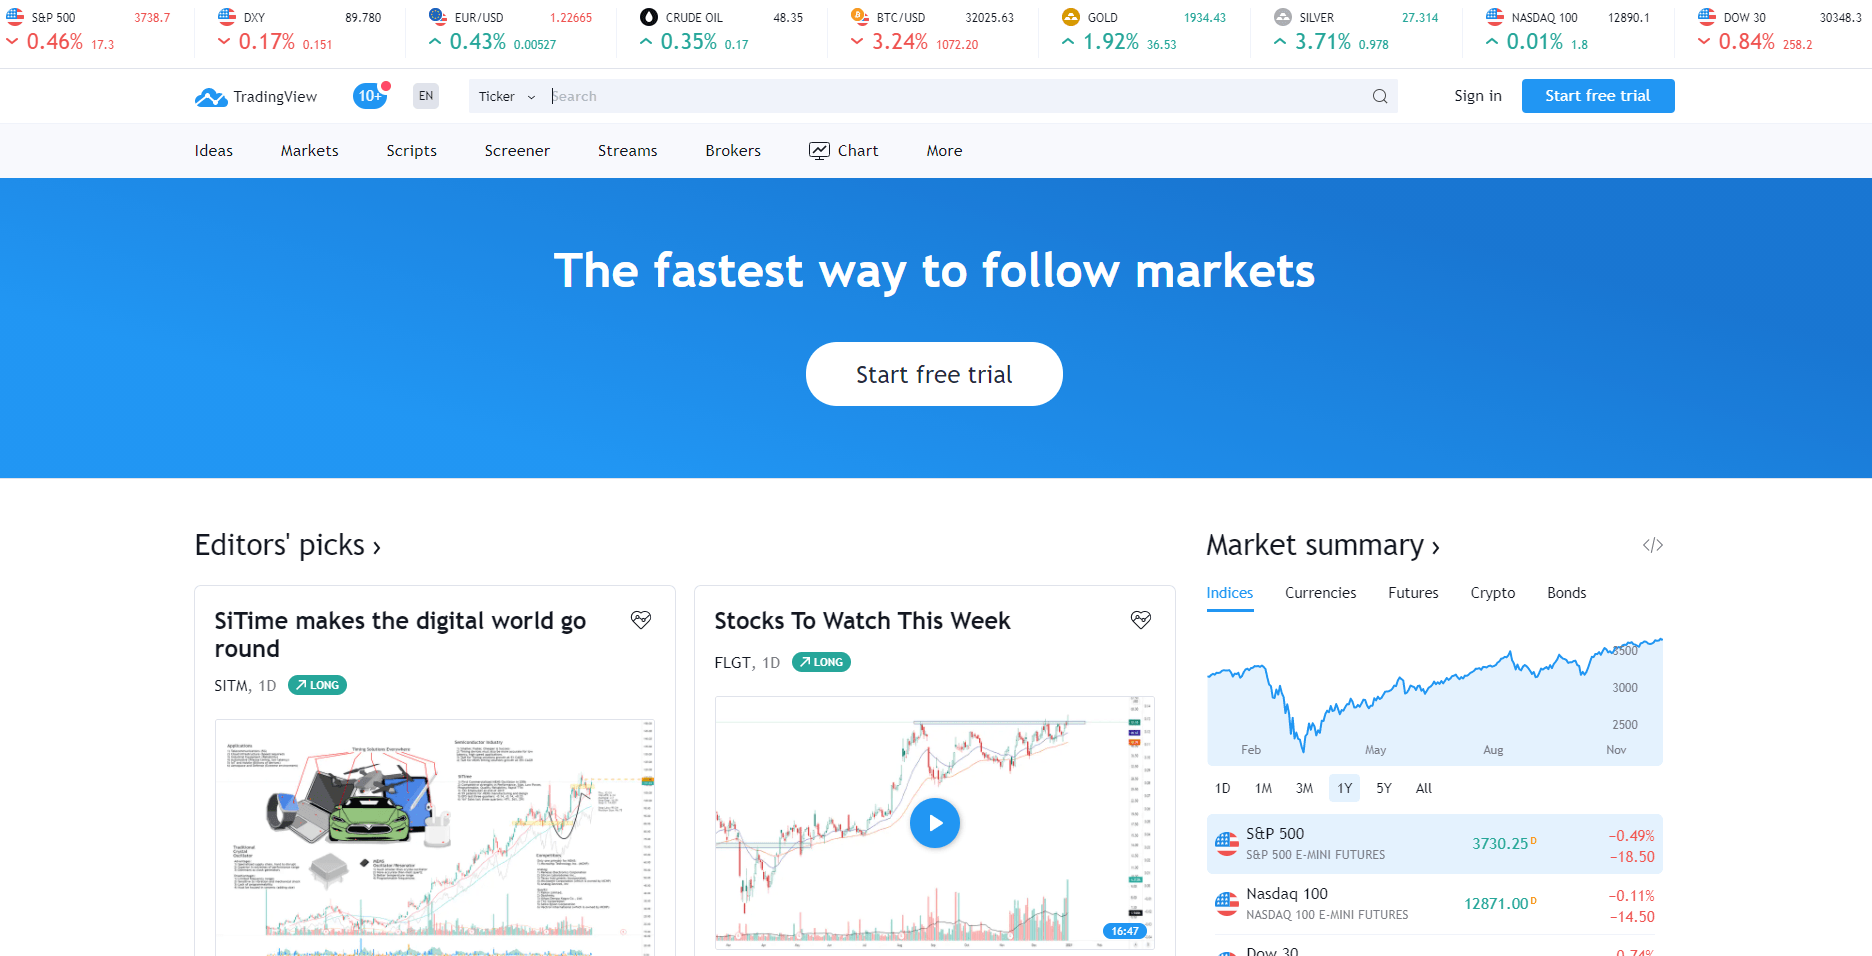 What Is Tradingview?